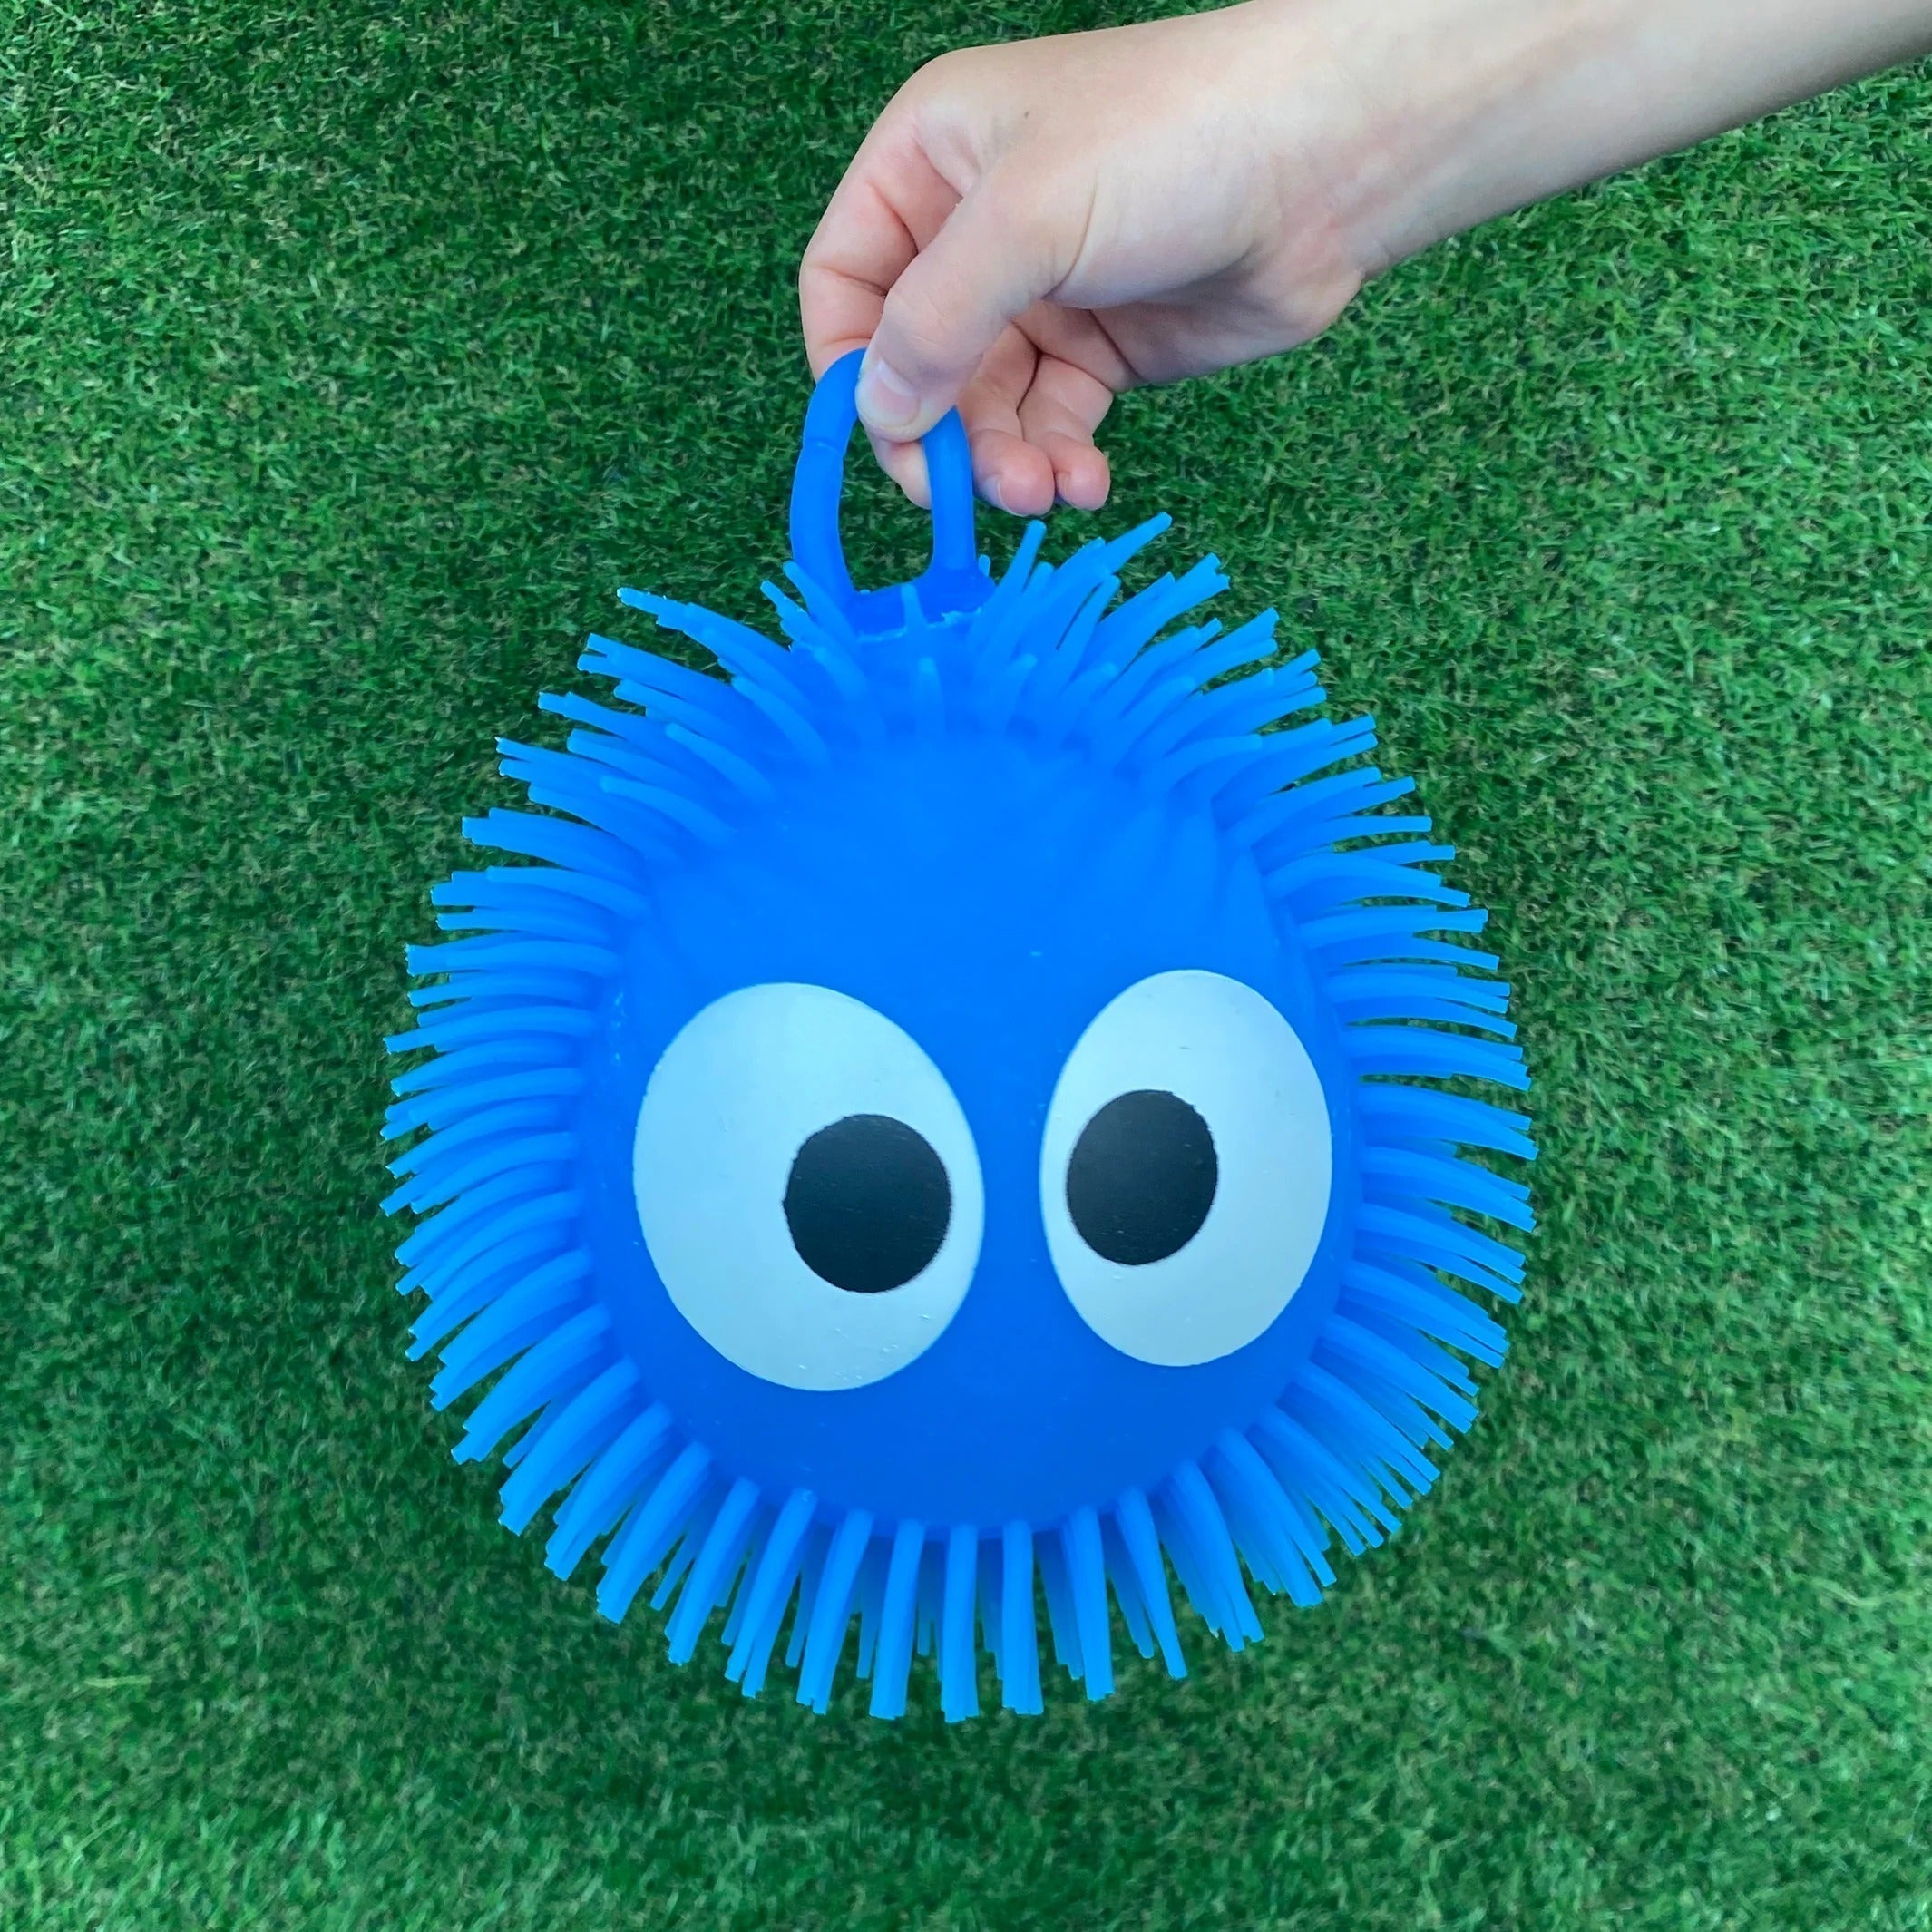 Big Eyed Puffer Ball, Looking for a fun and cute way to relieve stress and anxiety? The Big Eyed Puffer Ball is the perfect toy for you! This squishy and bouncy ball is designed to bring a smile to your face and help you relax after a long day. With its adorable cartoon eyes and bright colours, this puffer ball is irresistible to play with. Simply give it a good squeeze, and watch as bubbles form and pop out in a comical way. The tentacles of the ball provide a satisfying tactile experience, making it great